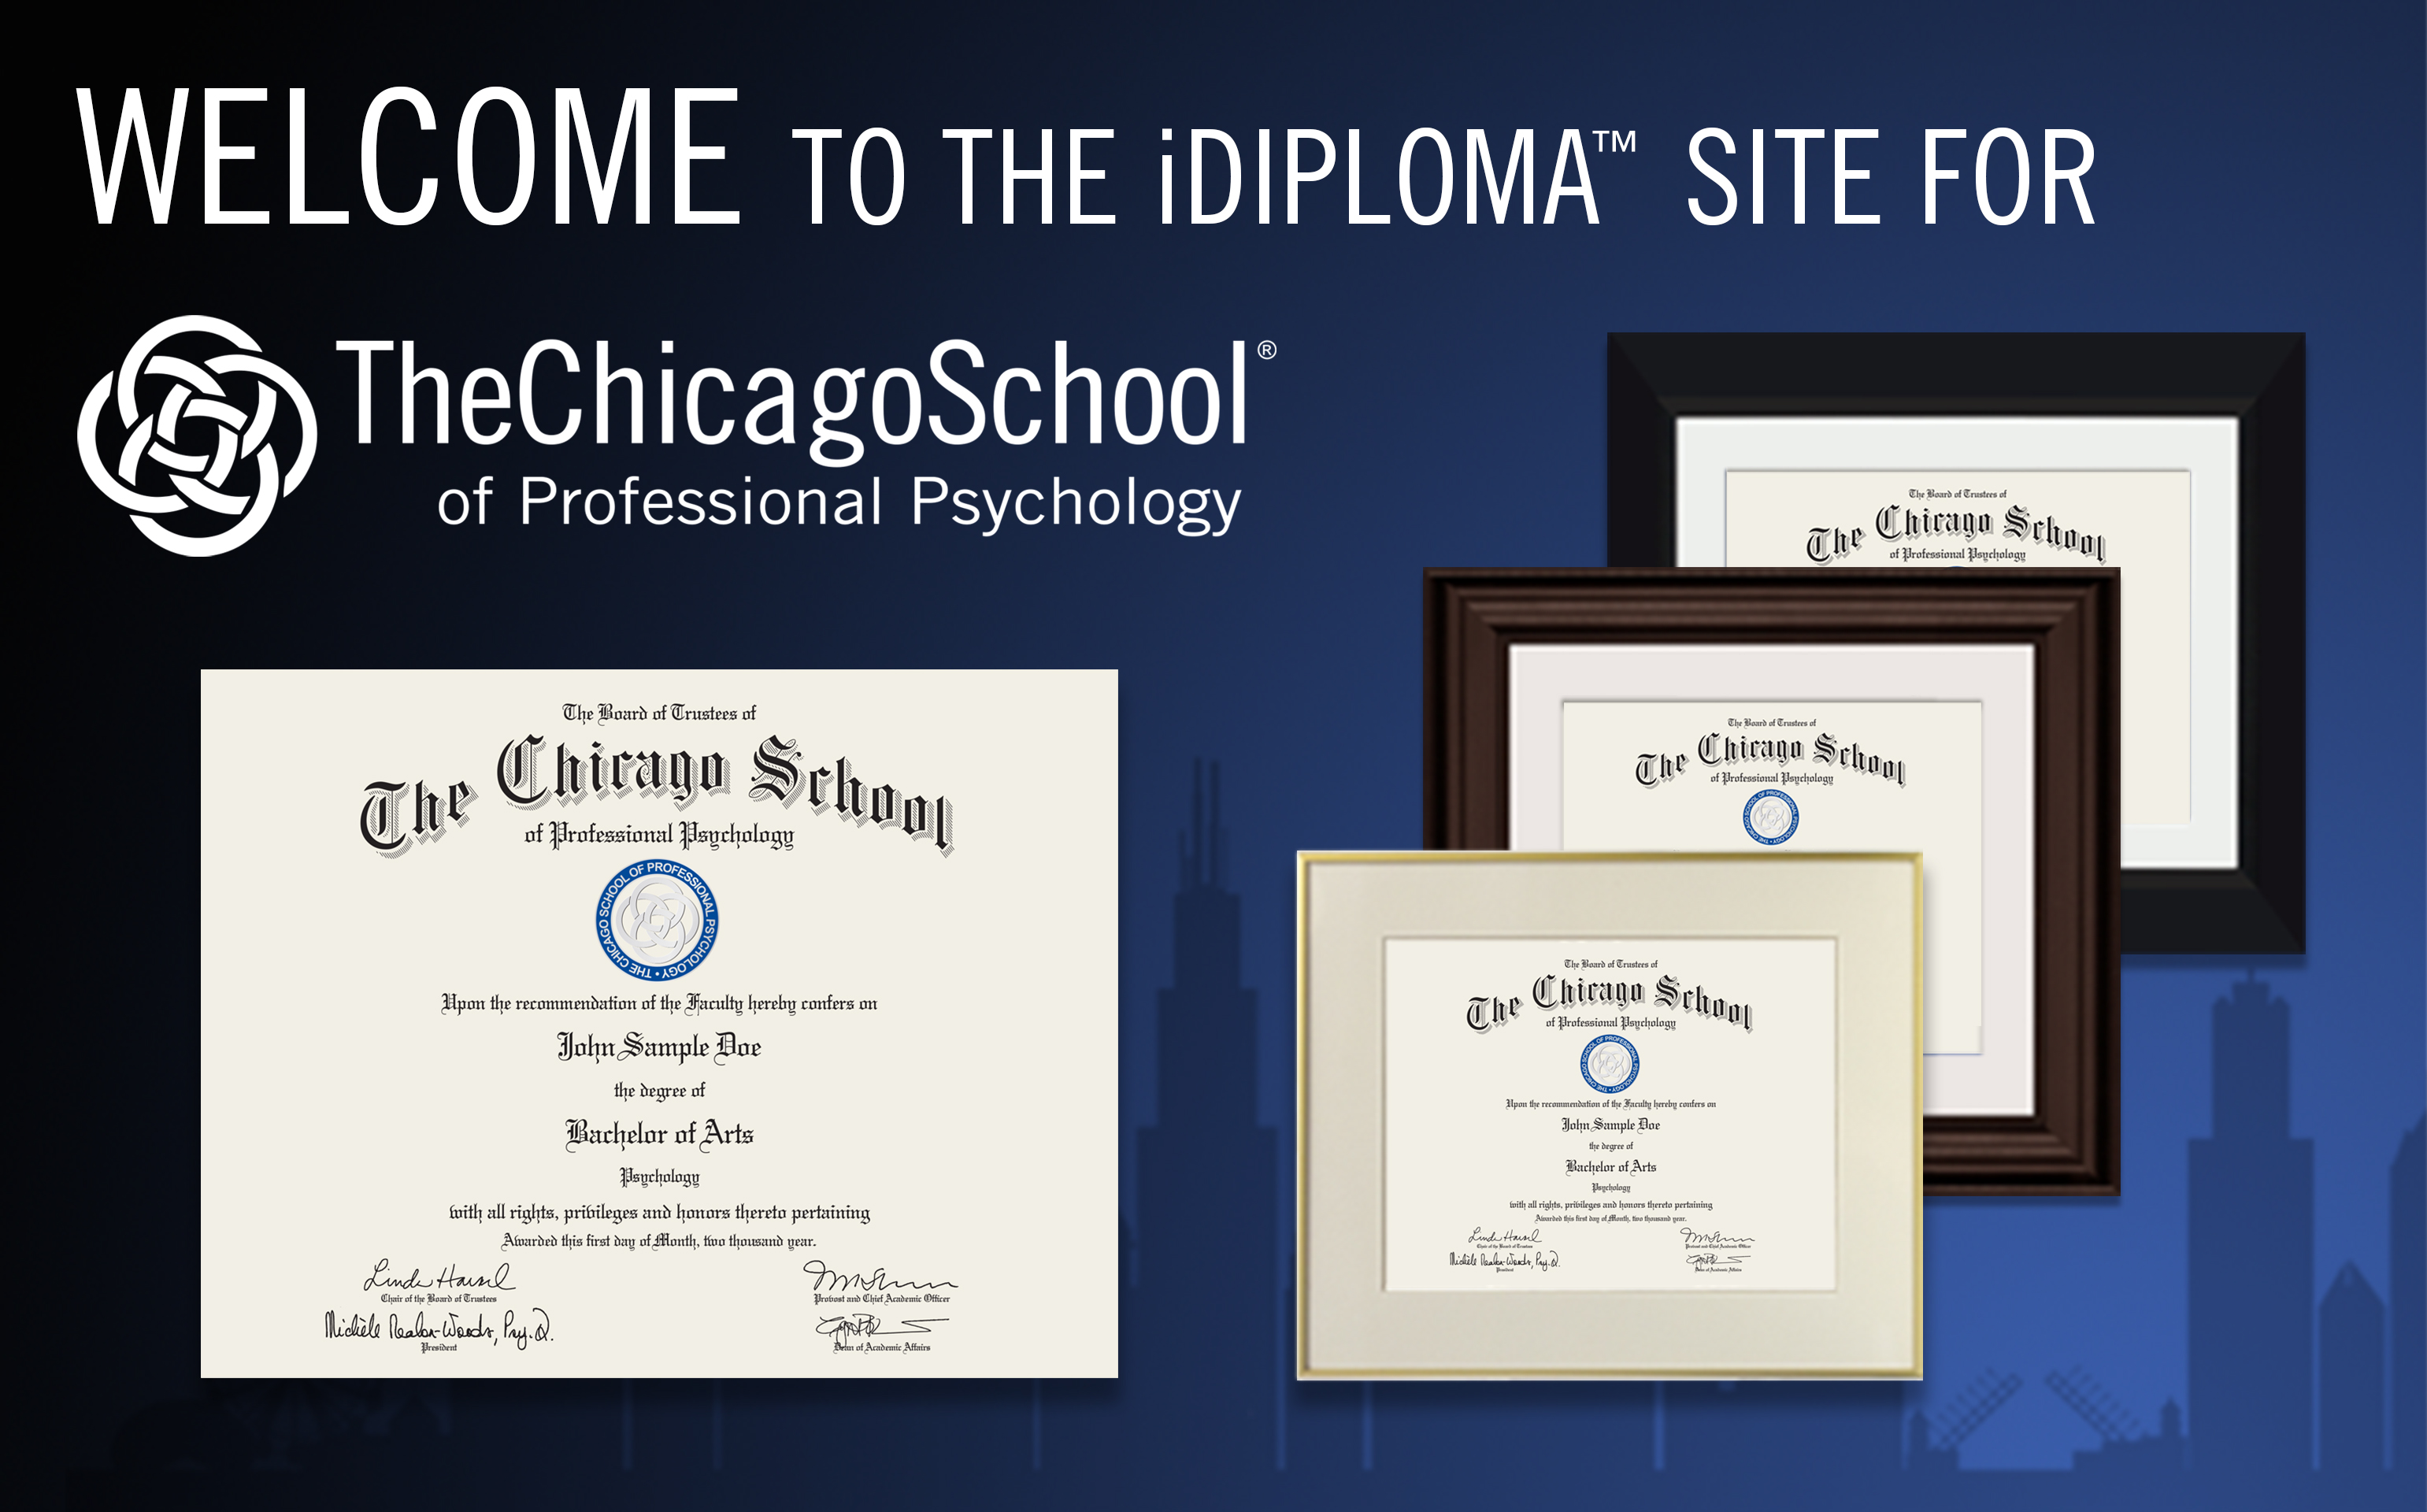 The Chicago School of Professional Psychology iDiploma™ website